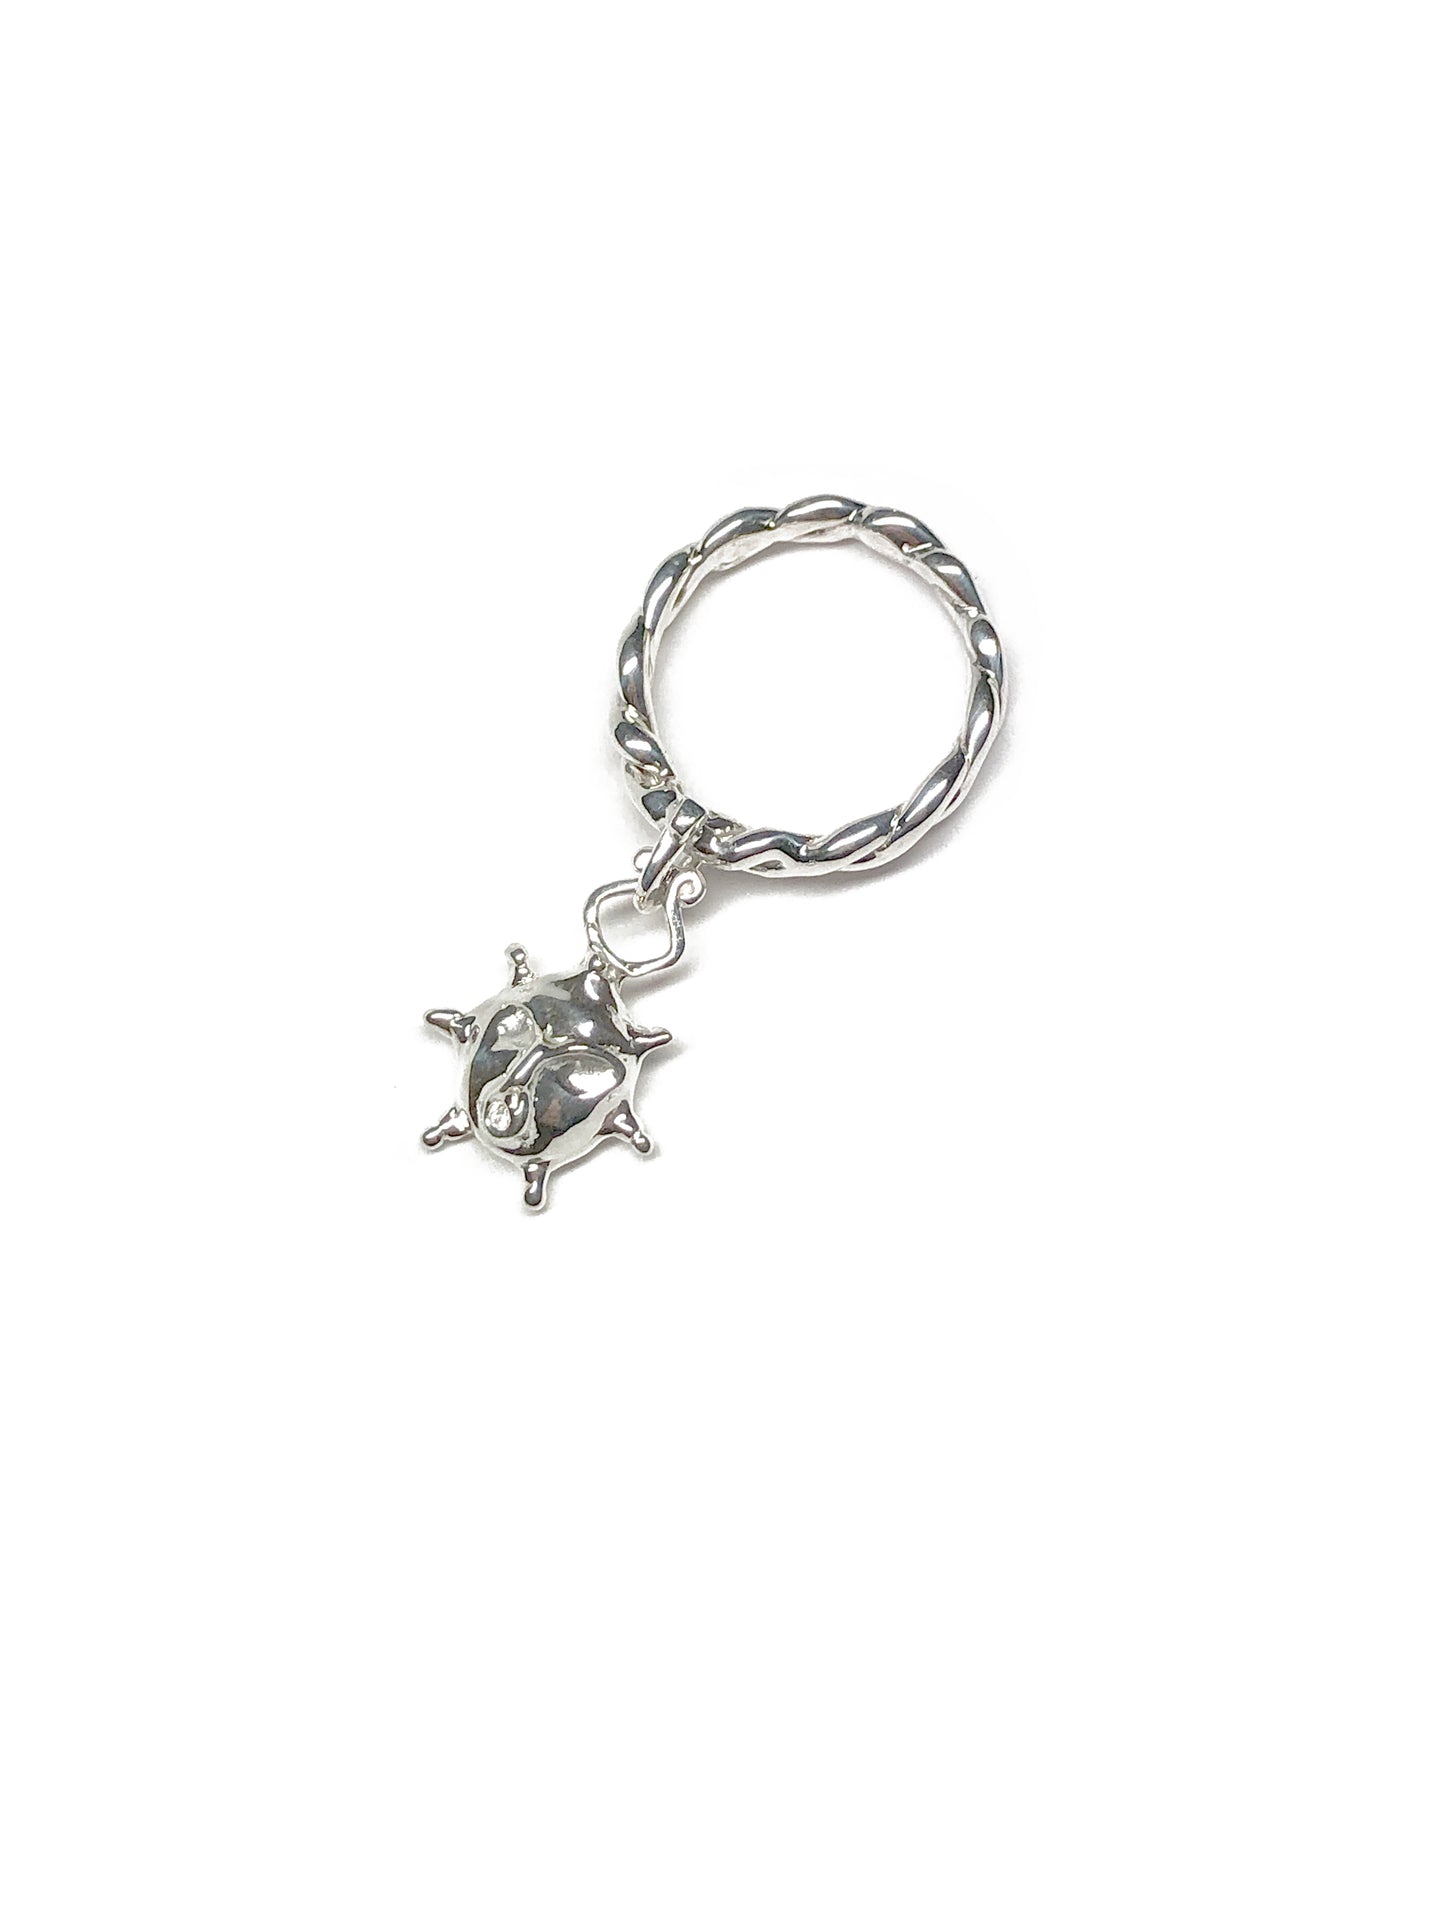 Product photo of the CLARK Aurora Charm Ring in Sterling Silver. Shot on white ground, this unique statement ring has a dangle charm. It has a twisted band with a loop on the top, attached is a silver sun talisman. Its mouth is a spiral and it has six points, like sun rays. This classic ring is made using the lost wax casting method. It is hand craft and made to order.